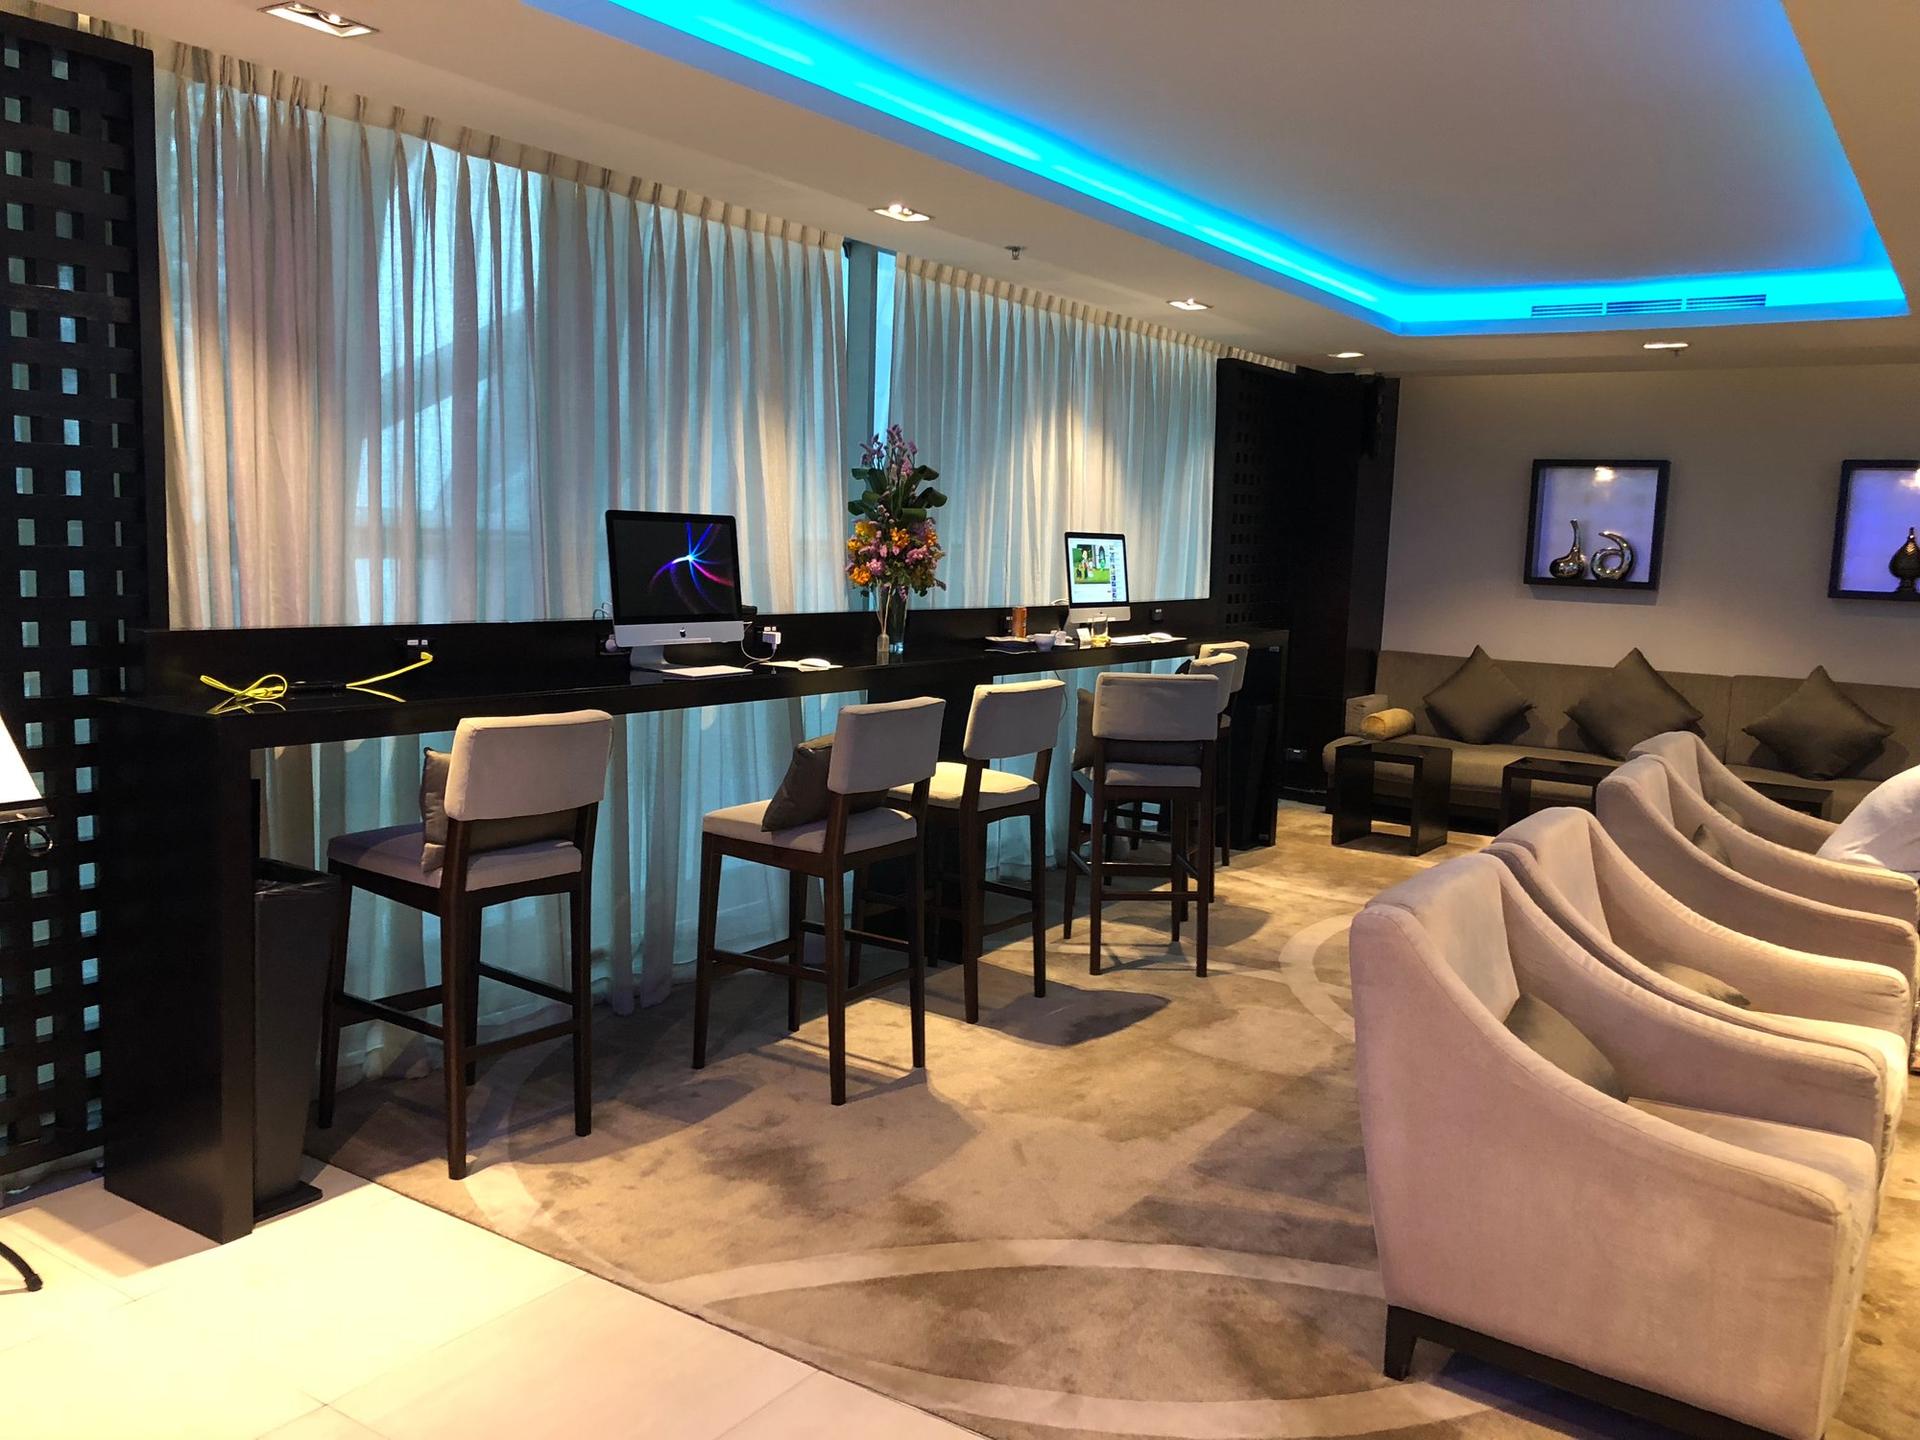 Oman Air First and Business Class Lounge image 24 of 50